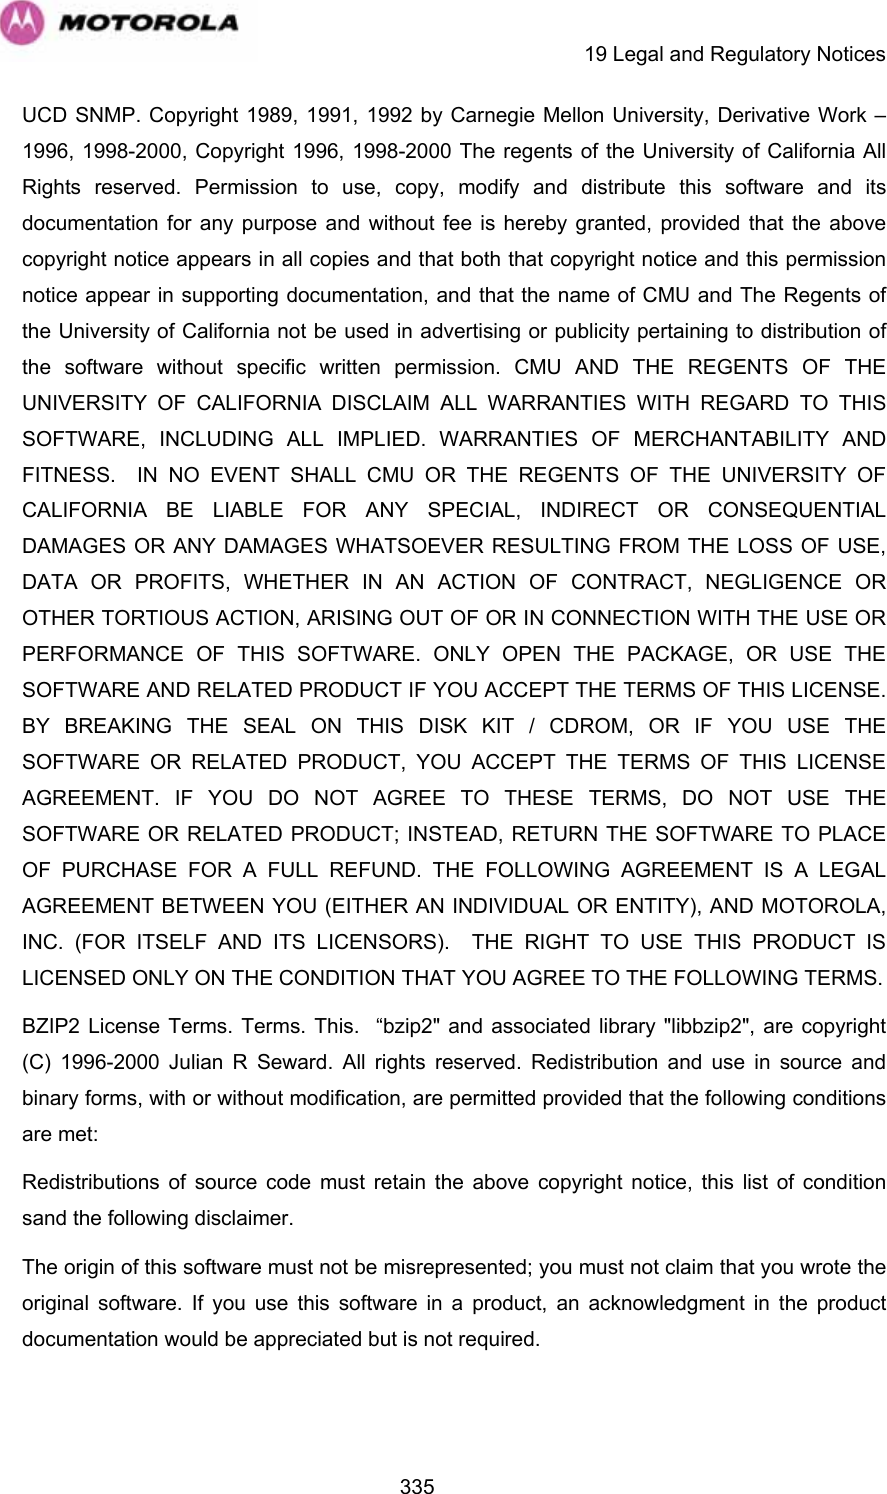     19 Legal and Regulatory Notices  335UCD SNMP. Copyright 1989, 1991, 1992 by Carnegie Mellon University, Derivative Work – 1996, 1998-2000, Copyright 1996, 1998-2000 The regents of the University of California All Rights reserved. Permission to use, copy, modify and distribute this software and its documentation for any purpose and without fee is hereby granted, provided that the above copyright notice appears in all copies and that both that copyright notice and this permission notice appear in supporting documentation, and that the name of CMU and The Regents of the University of California not be used in advertising or publicity pertaining to distribution of the software without specific written permission. CMU AND THE REGENTS OF THE UNIVERSITY OF CALIFORNIA DISCLAIM ALL WARRANTIES WITH REGARD TO THIS SOFTWARE, INCLUDING ALL IMPLIED. WARRANTIES OF MERCHANTABILITY AND FITNESS.  IN NO EVENT SHALL CMU OR THE REGENTS OF THE UNIVERSITY OF CALIFORNIA BE LIABLE FOR ANY SPECIAL, INDIRECT OR CONSEQUENTIAL DAMAGES OR ANY DAMAGES WHATSOEVER RESULTING FROM THE LOSS OF USE, DATA OR PROFITS, WHETHER IN AN ACTION OF CONTRACT, NEGLIGENCE OR OTHER TORTIOUS ACTION, ARISING OUT OF OR IN CONNECTION WITH THE USE OR PERFORMANCE OF THIS SOFTWARE. ONLY OPEN THE PACKAGE, OR USE THE SOFTWARE AND RELATED PRODUCT IF YOU ACCEPT THE TERMS OF THIS LICENSE. BY BREAKING THE SEAL ON THIS DISK KIT / CDROM, OR IF YOU USE THE SOFTWARE OR RELATED PRODUCT, YOU ACCEPT THE TERMS OF THIS LICENSE AGREEMENT. IF YOU DO NOT AGREE TO THESE TERMS, DO NOT USE THE SOFTWARE OR RELATED PRODUCT; INSTEAD, RETURN THE SOFTWARE TO PLACE OF PURCHASE FOR A FULL REFUND. THE FOLLOWING AGREEMENT IS A LEGAL AGREEMENT BETWEEN YOU (EITHER AN INDIVIDUAL OR ENTITY), AND MOTOROLA, INC. (FOR ITSELF AND ITS LICENSORS).  THE RIGHT TO USE THIS PRODUCT IS LICENSED ONLY ON THE CONDITION THAT YOU AGREE TO THE FOLLOWING TERMS. BZIP2 License Terms. Terms. This.  “bzip2&quot; and associated library &quot;libbzip2&quot;, are copyright (C) 1996-2000 Julian R Seward. All rights reserved. Redistribution and use in source and binary forms, with or without modification, are permitted provided that the following conditions are met: Redistributions of source code must retain the above copyright notice, this list of condition sand the following disclaimer. The origin of this software must not be misrepresented; you must not claim that you wrote the original software. If you use this software in a product, an acknowledgment in the product documentation would be appreciated but is not required. 